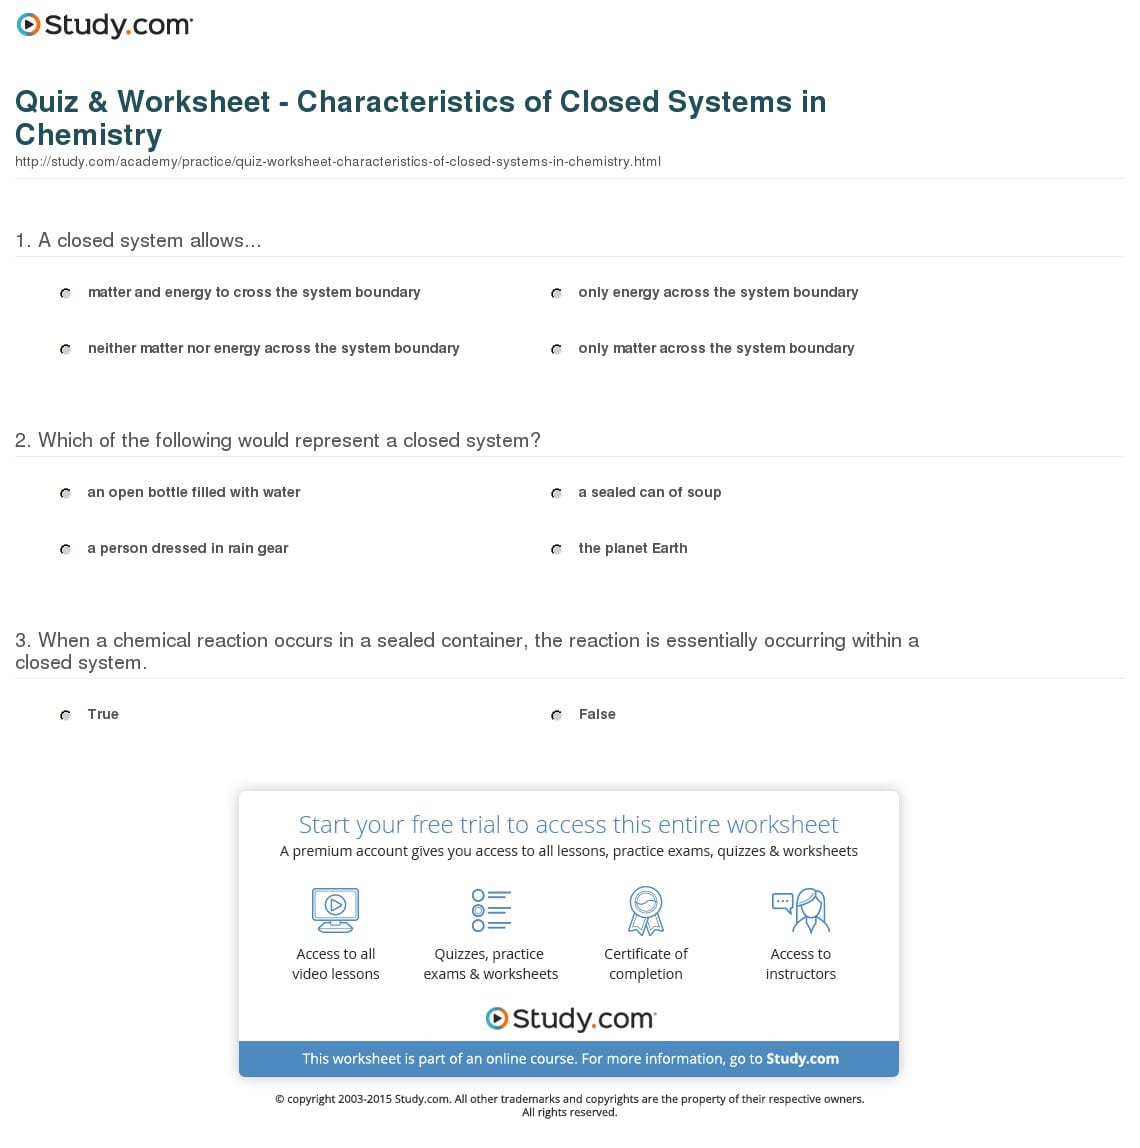 quiz-worksheet-characteristics-of-closed-systems-in-db-excel